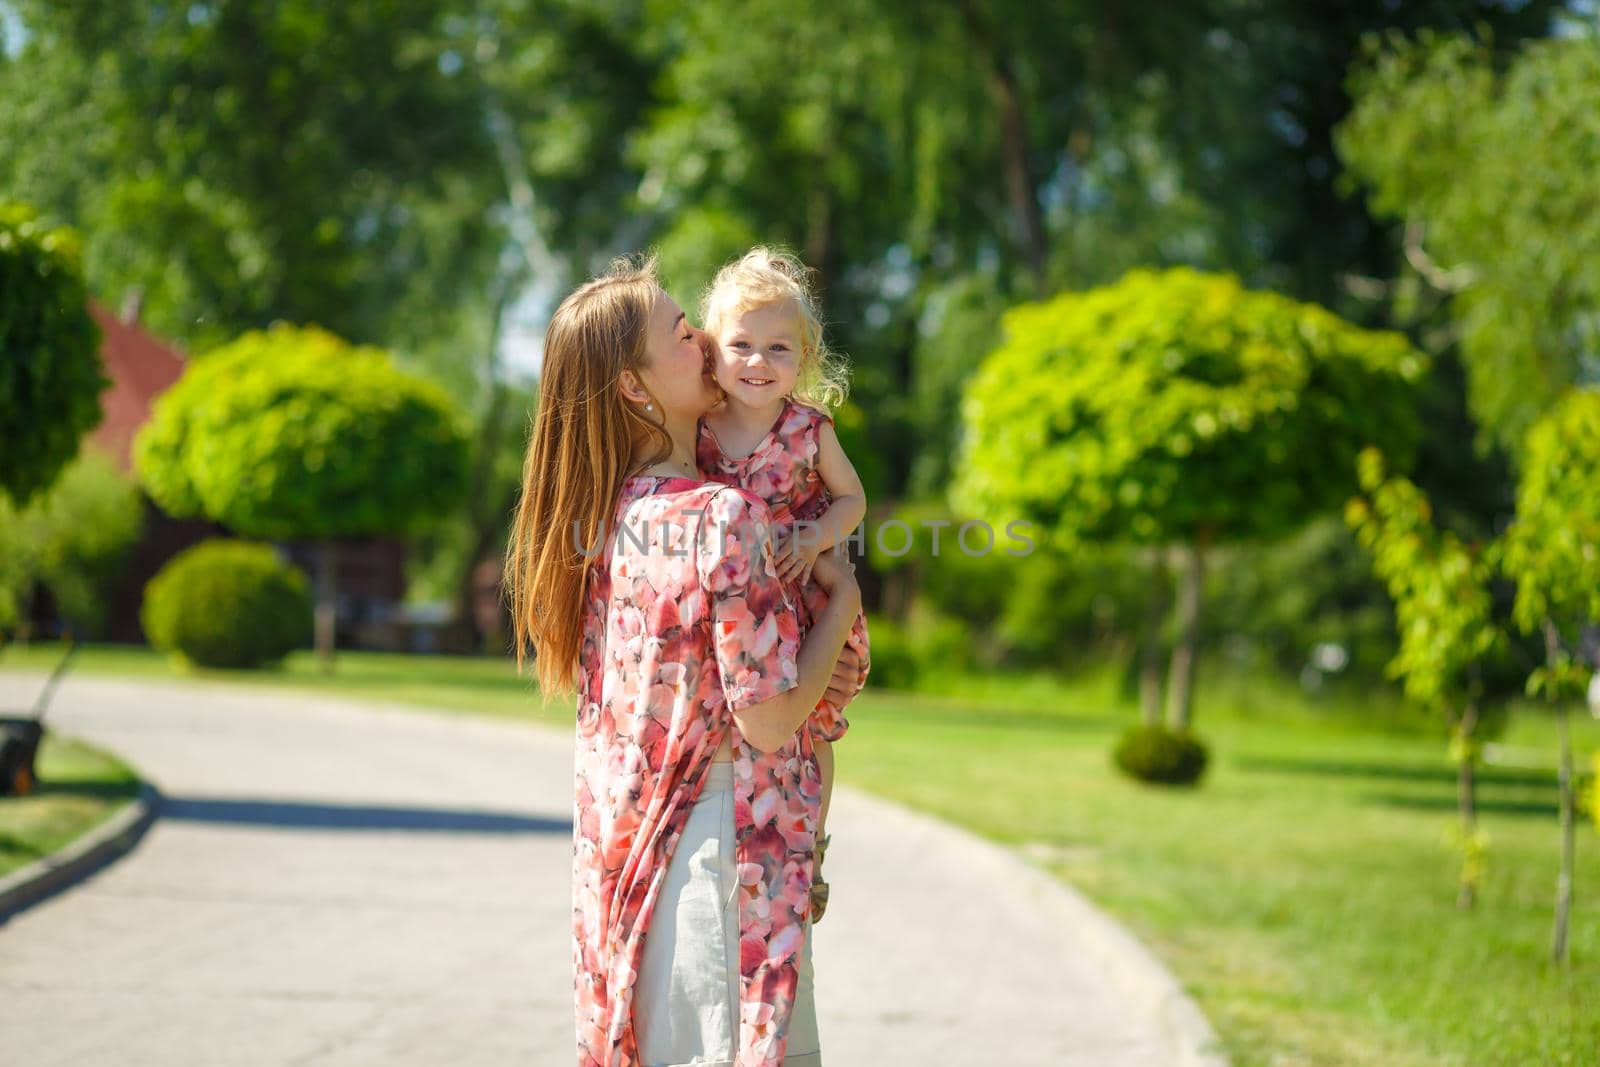 A charming girl in a light summer sundress walks in a green park with her little daughter, holding her in her arms. Enjoys warm sunny summer days.